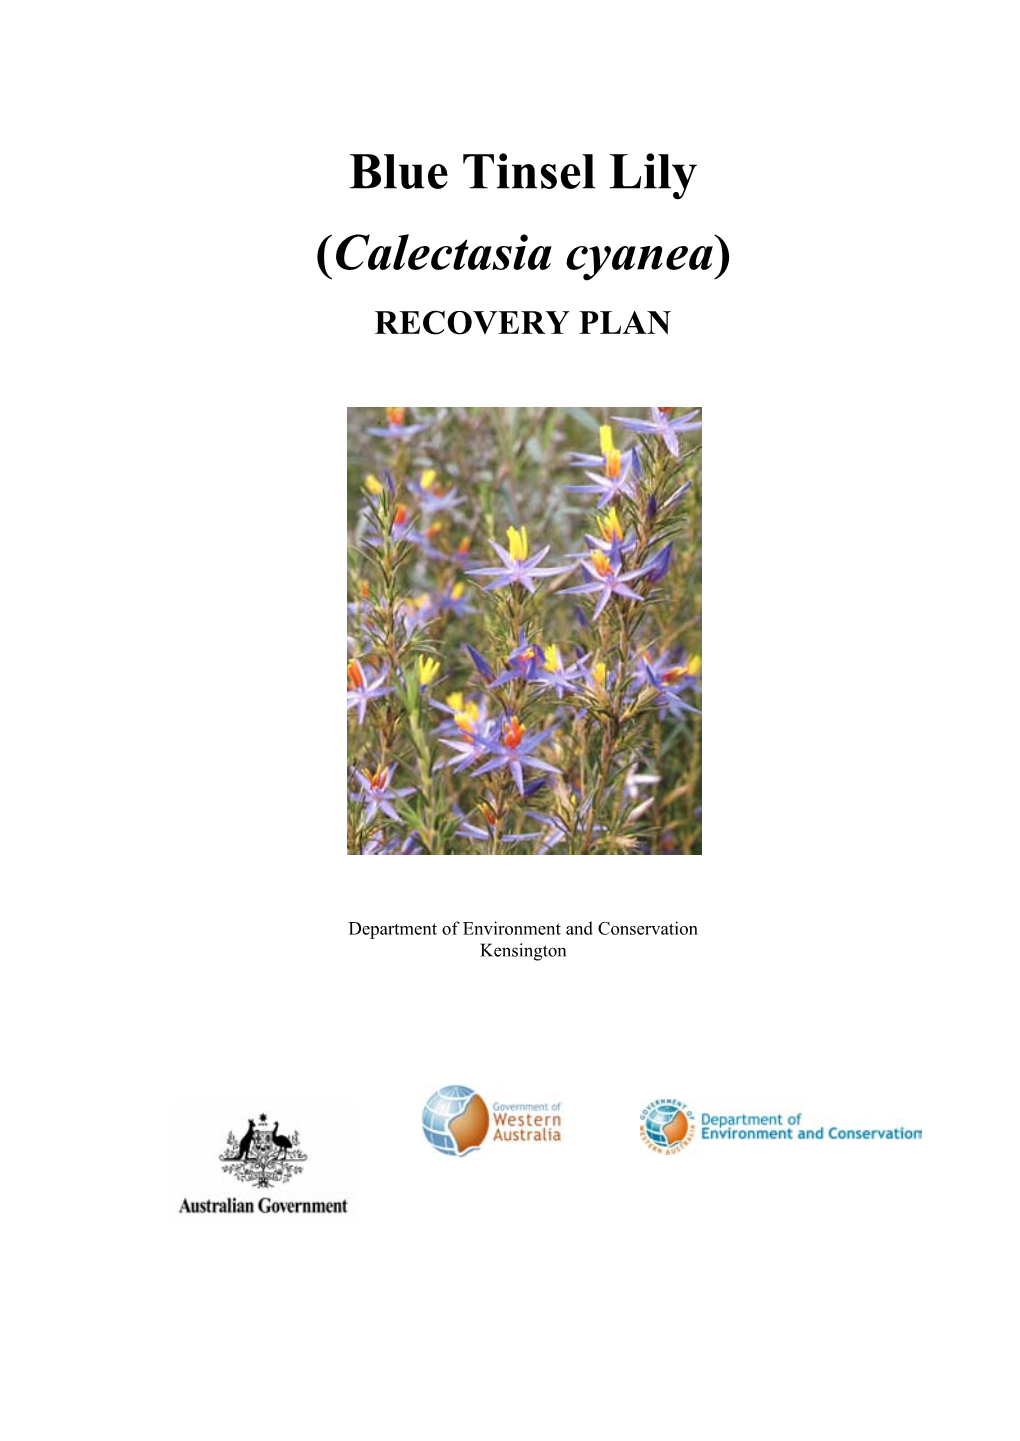 Calectasia Cyanea) RECOVERY PLAN